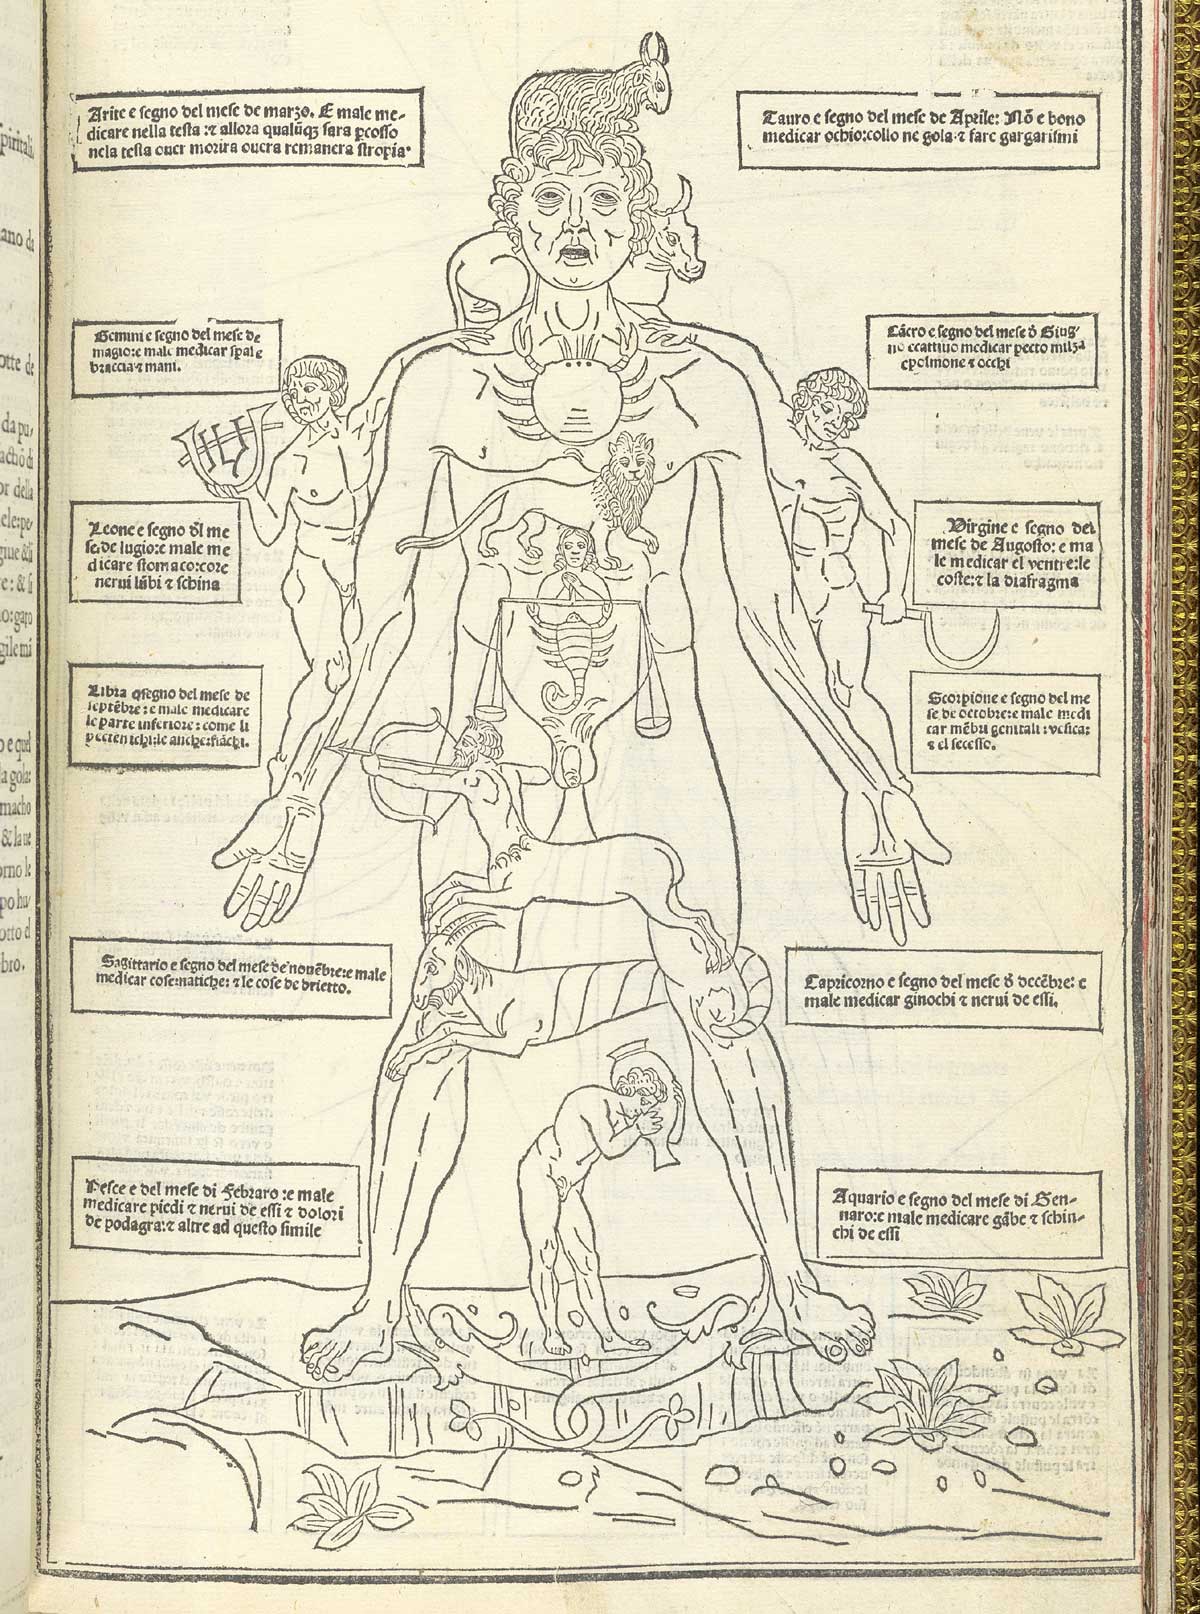 Page 15 of Johannes de Ketham's Fasiculo de medicina, featuring zodiac man, a human figure with the parts of the body identified with signs of the zodiac.